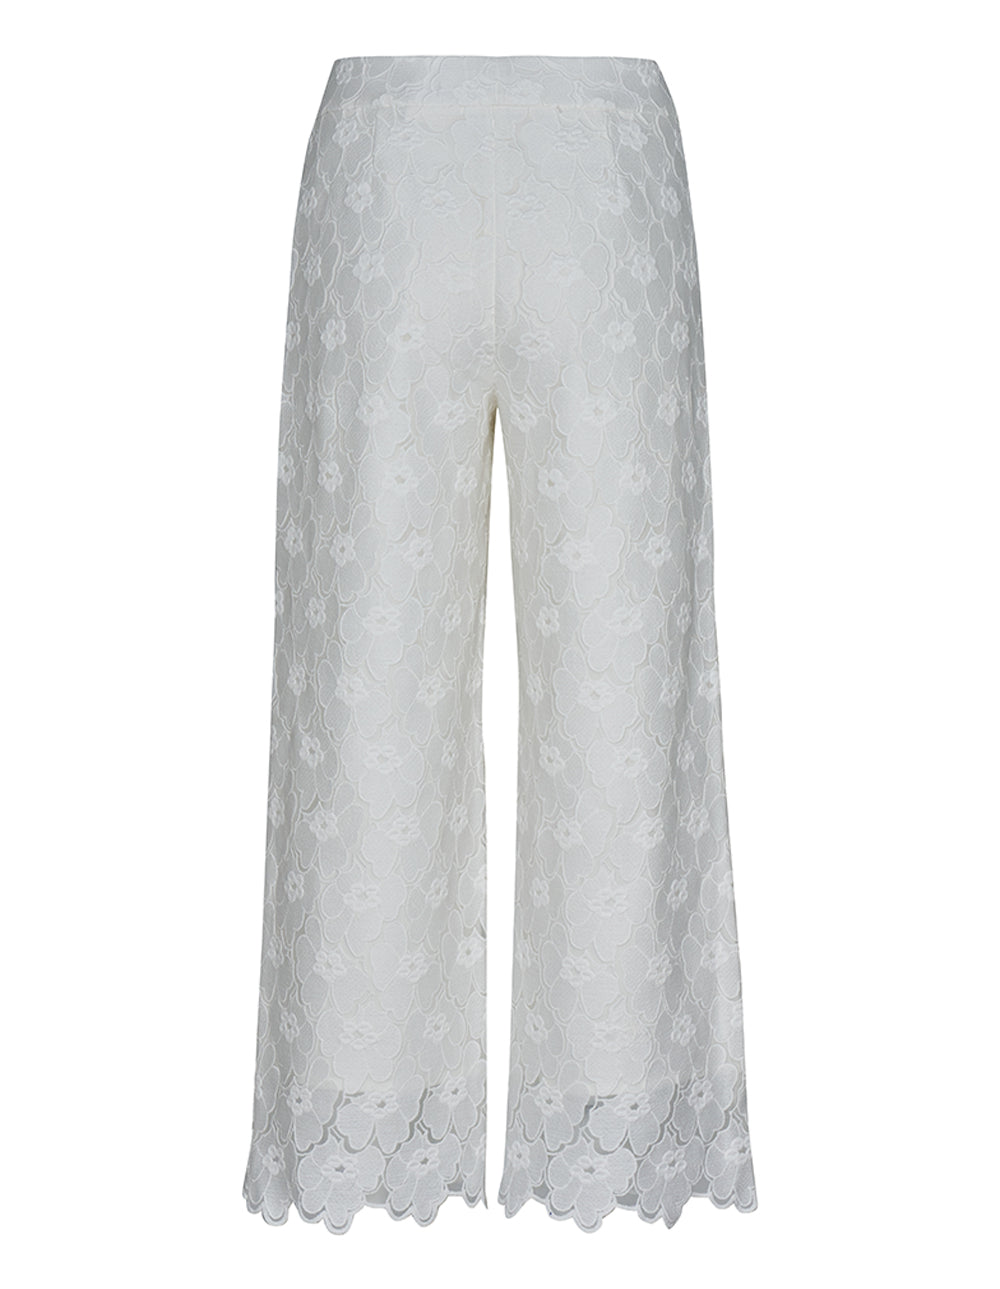 Club21 Collection Floral Lace Cropped Pants (White)